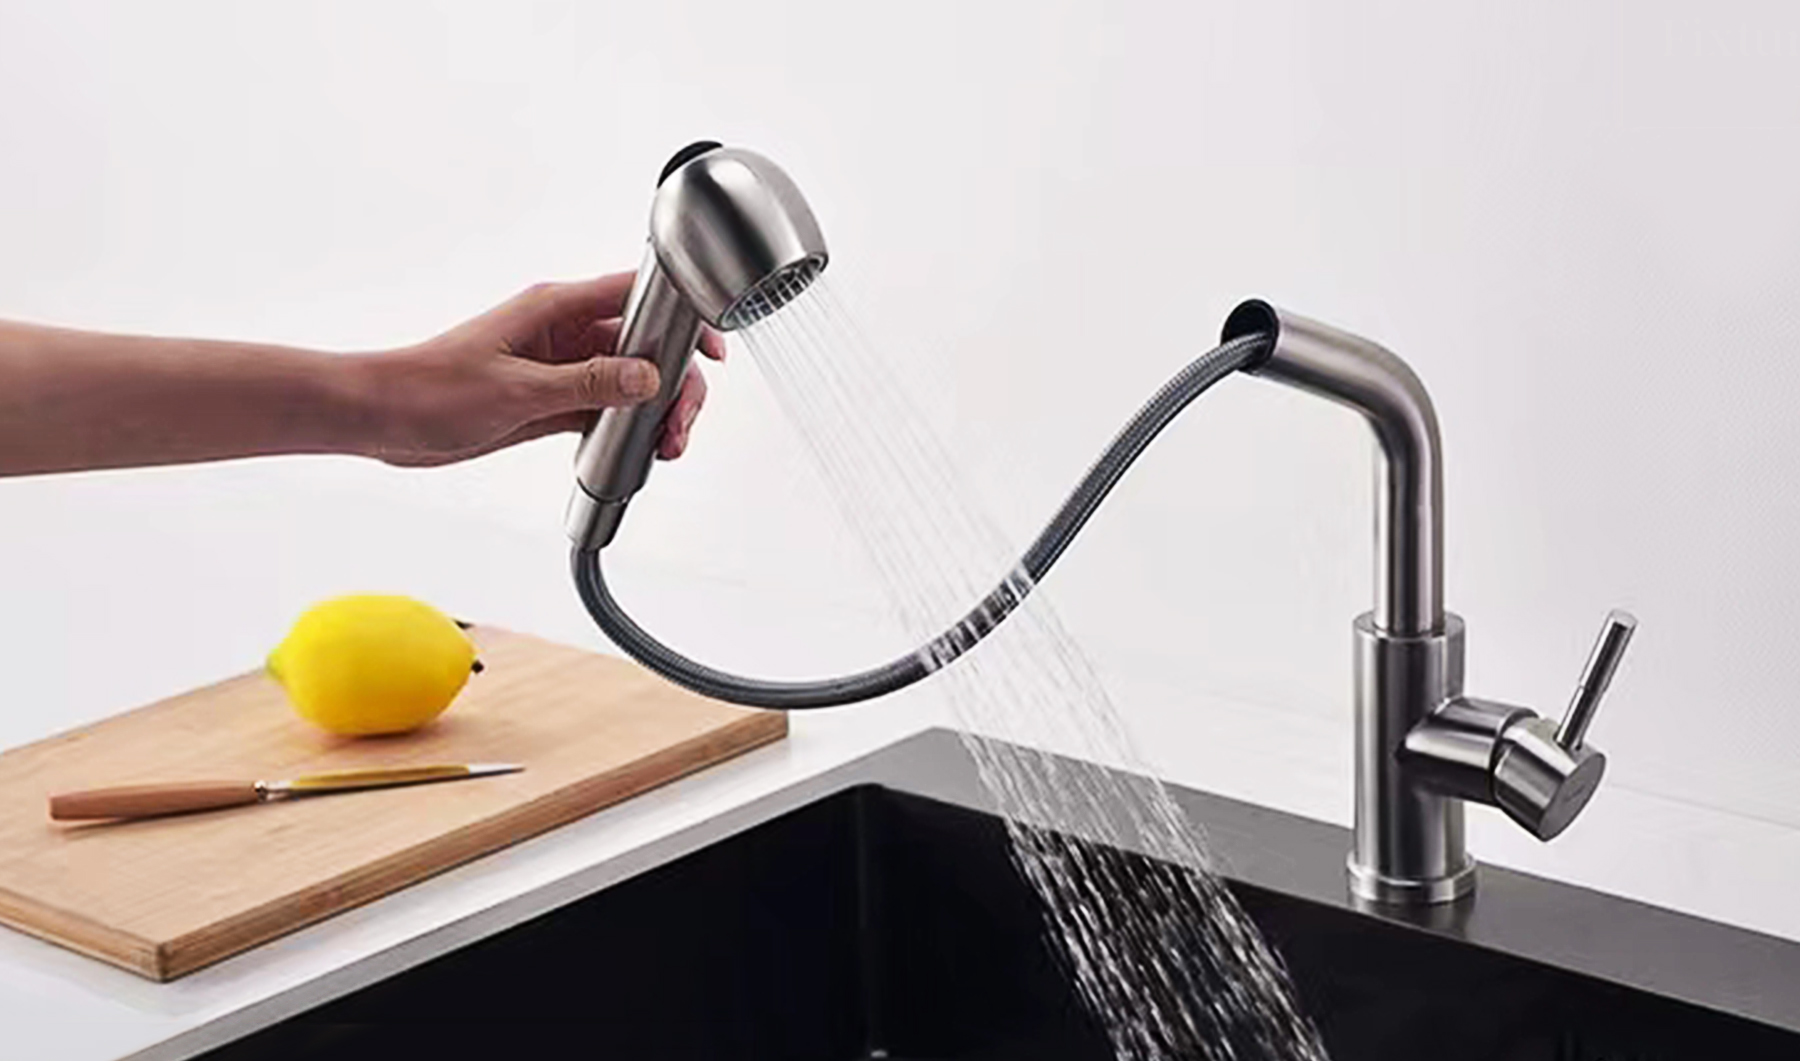 Retractable stainless steel sink hot and cold faucet